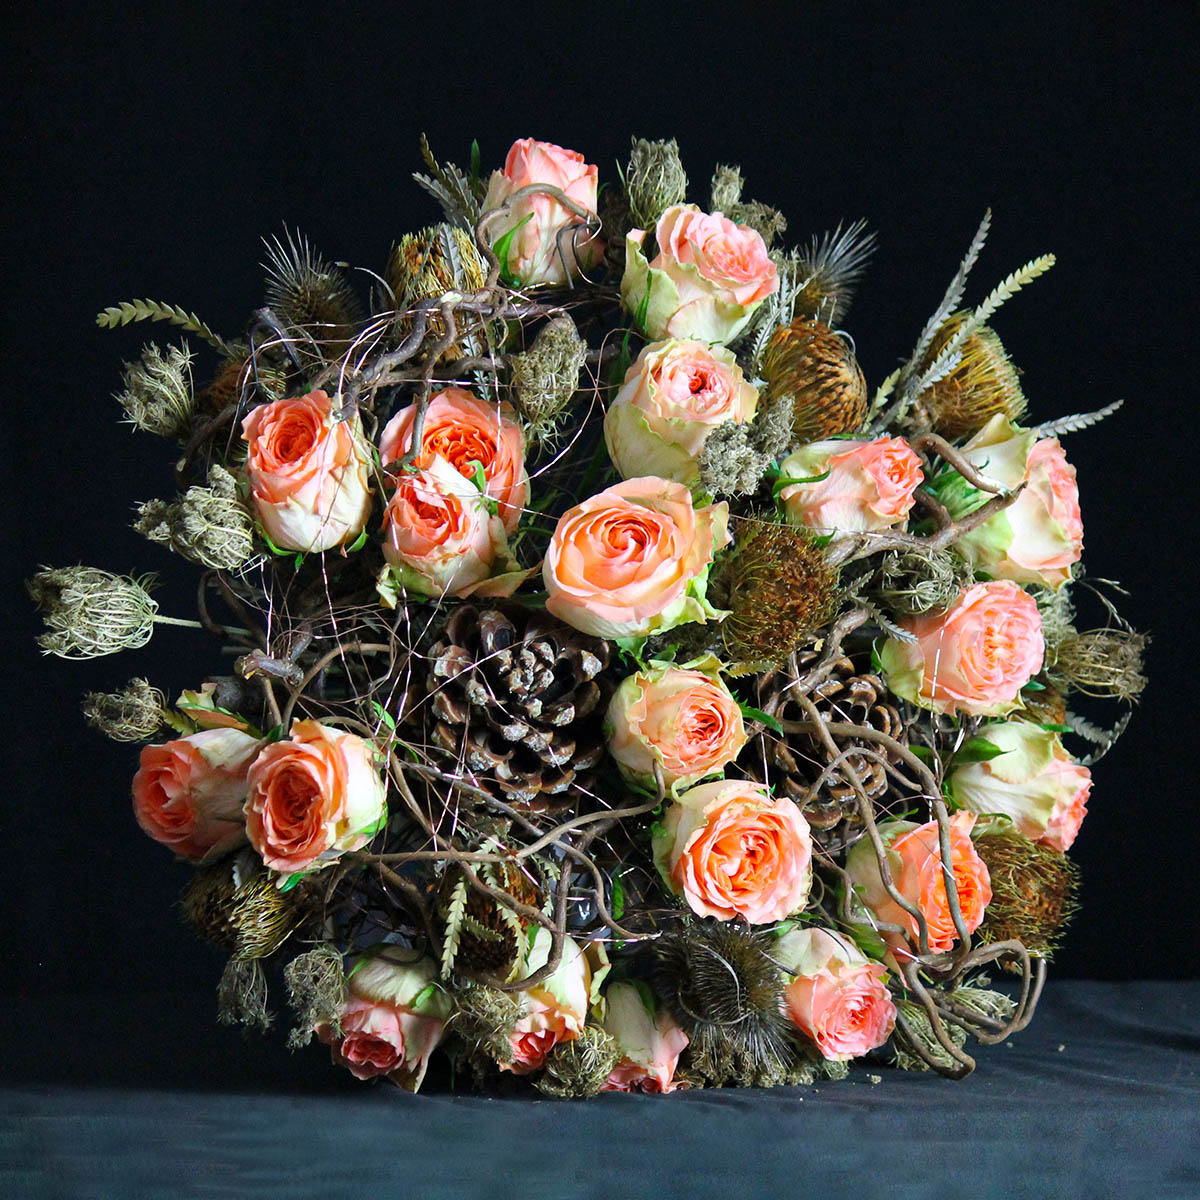 Marvelling at the Incredible Roses From Decofresh - Rose Barbarella 32